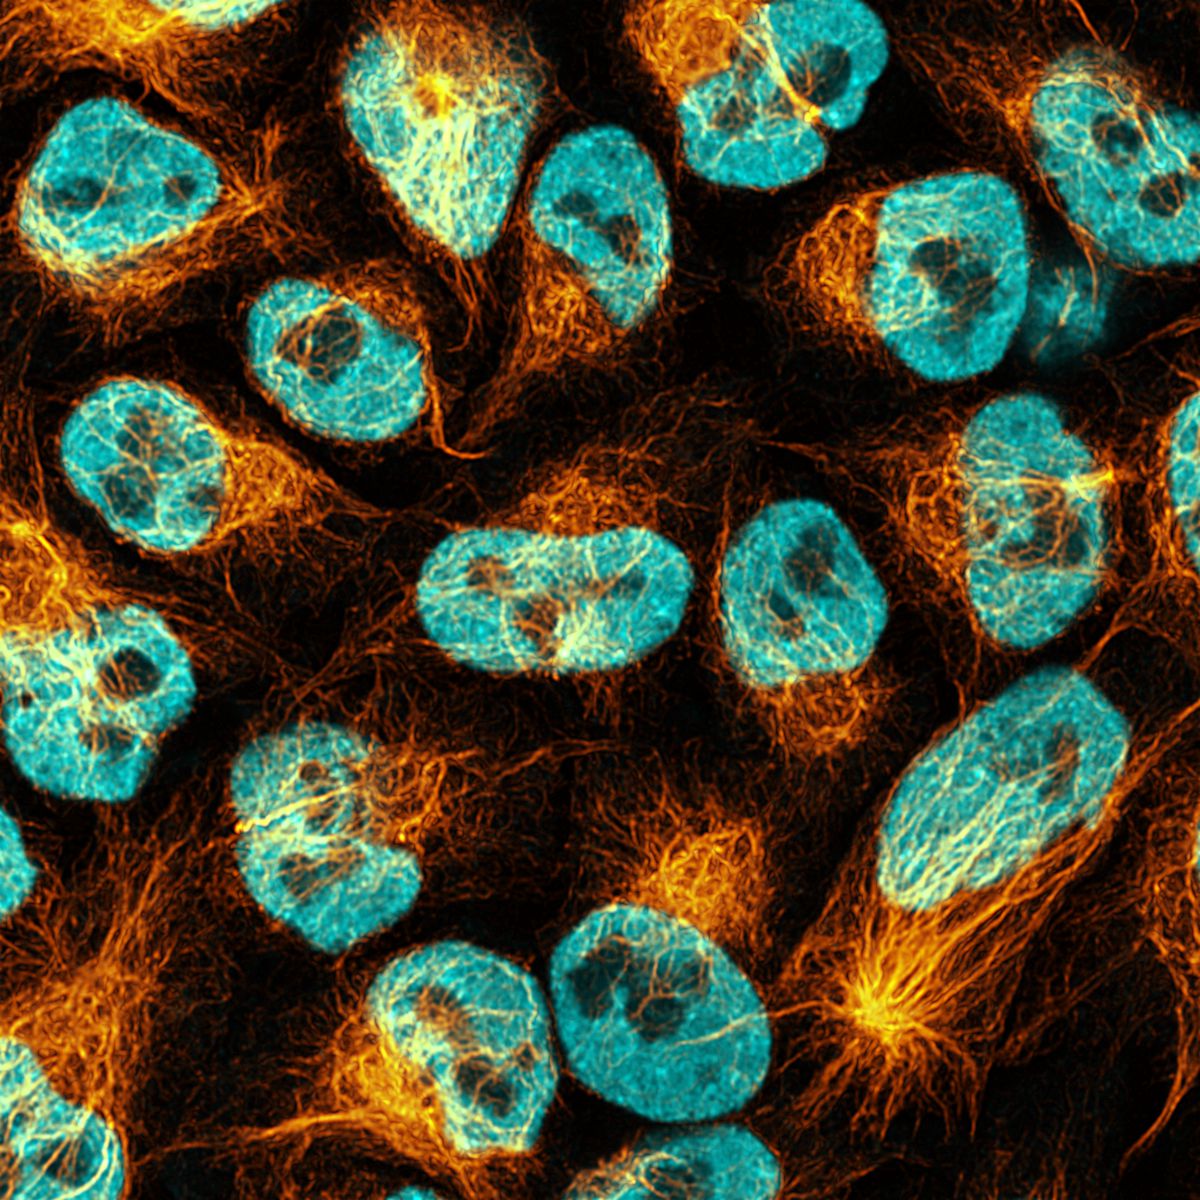 Immunofluorescence of HeLa: PFA-fixed HeLa cells were stained with anti-Vimentin labeled with FlexAble CoraLite® Plus 555 Kit (KFA022, yellow) and anti-hnRNP labeled with FlexAble CoraLite® Plus 647 Kit (KFA023, cyan).​ Confocal images were acquired with a 100x oil objective and post-processed. Images were recorded at the Core Facility Bioimaging at the Biomedical Center, LMU Munich.